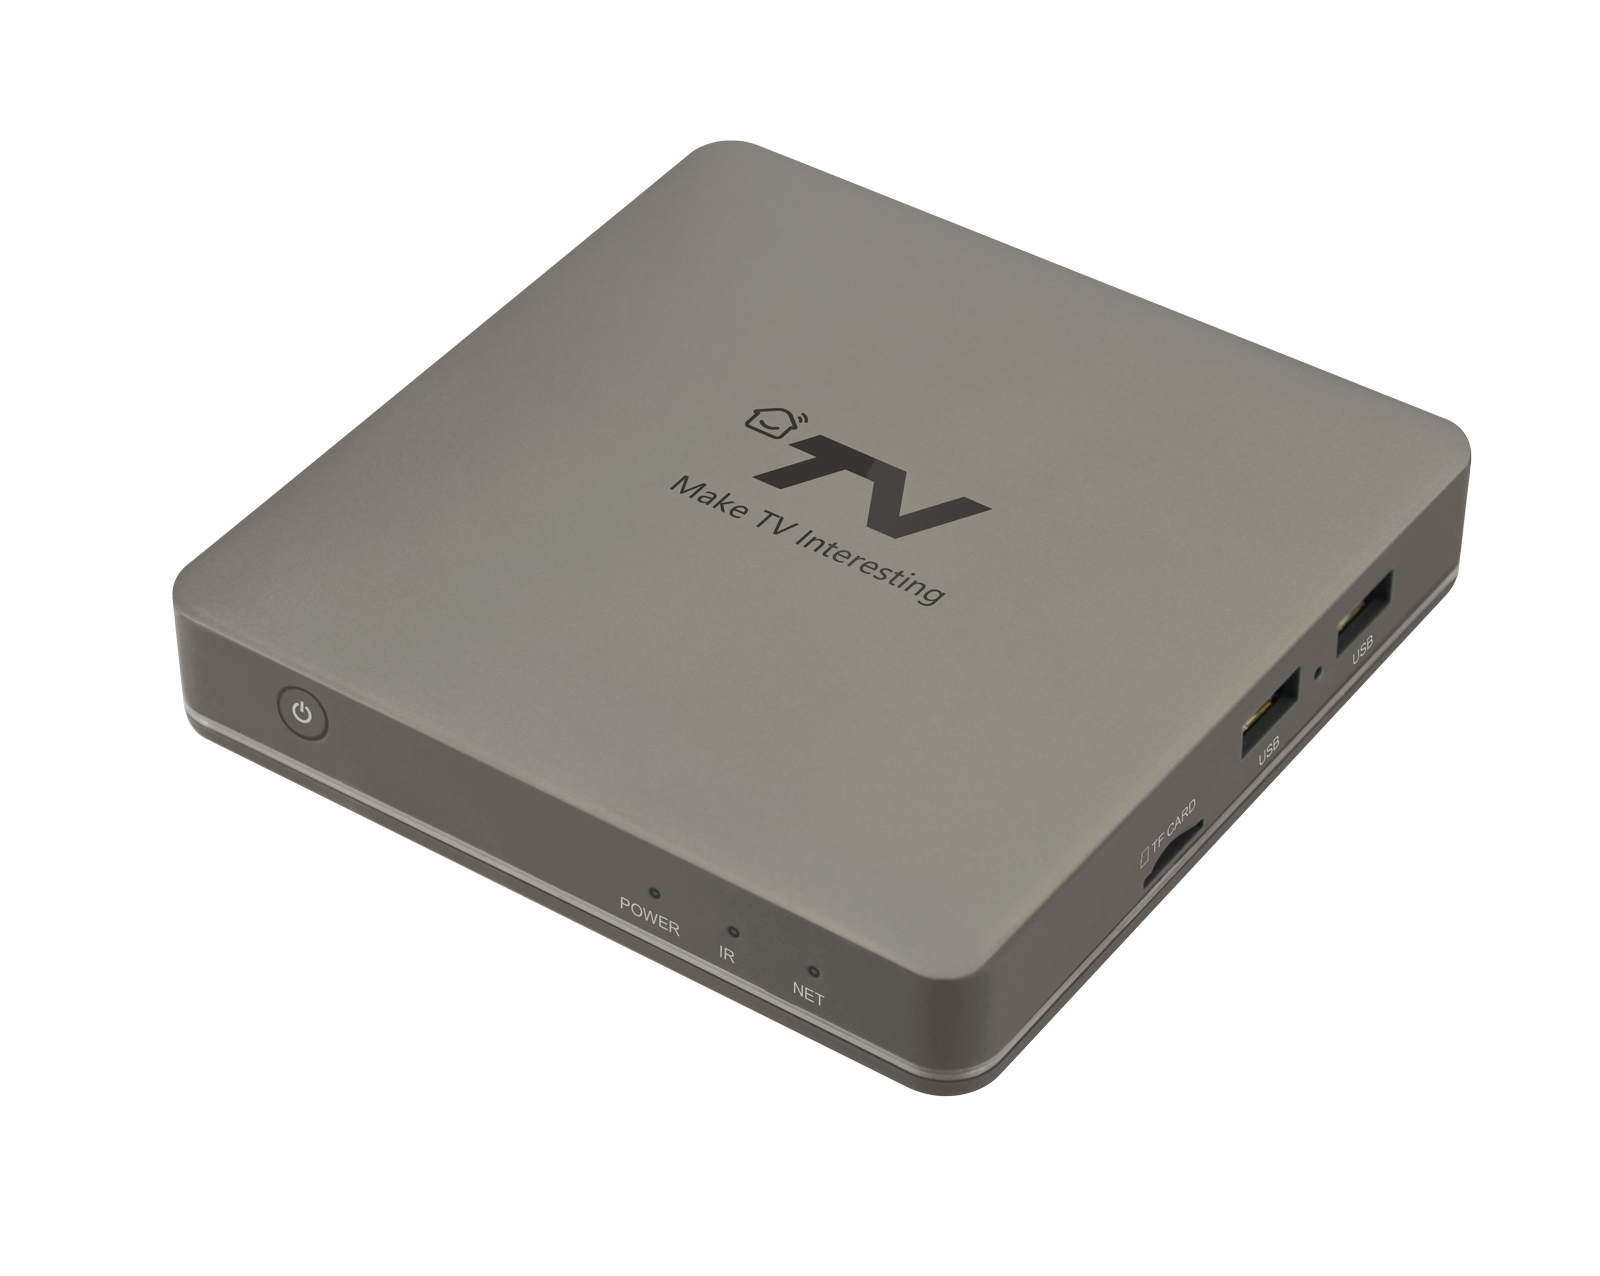 Android IPTV Box Manufacturer, Android IPTV Box supplier, Android TV BOX  with 3G/4G LTE WCDMA wireless module built-in